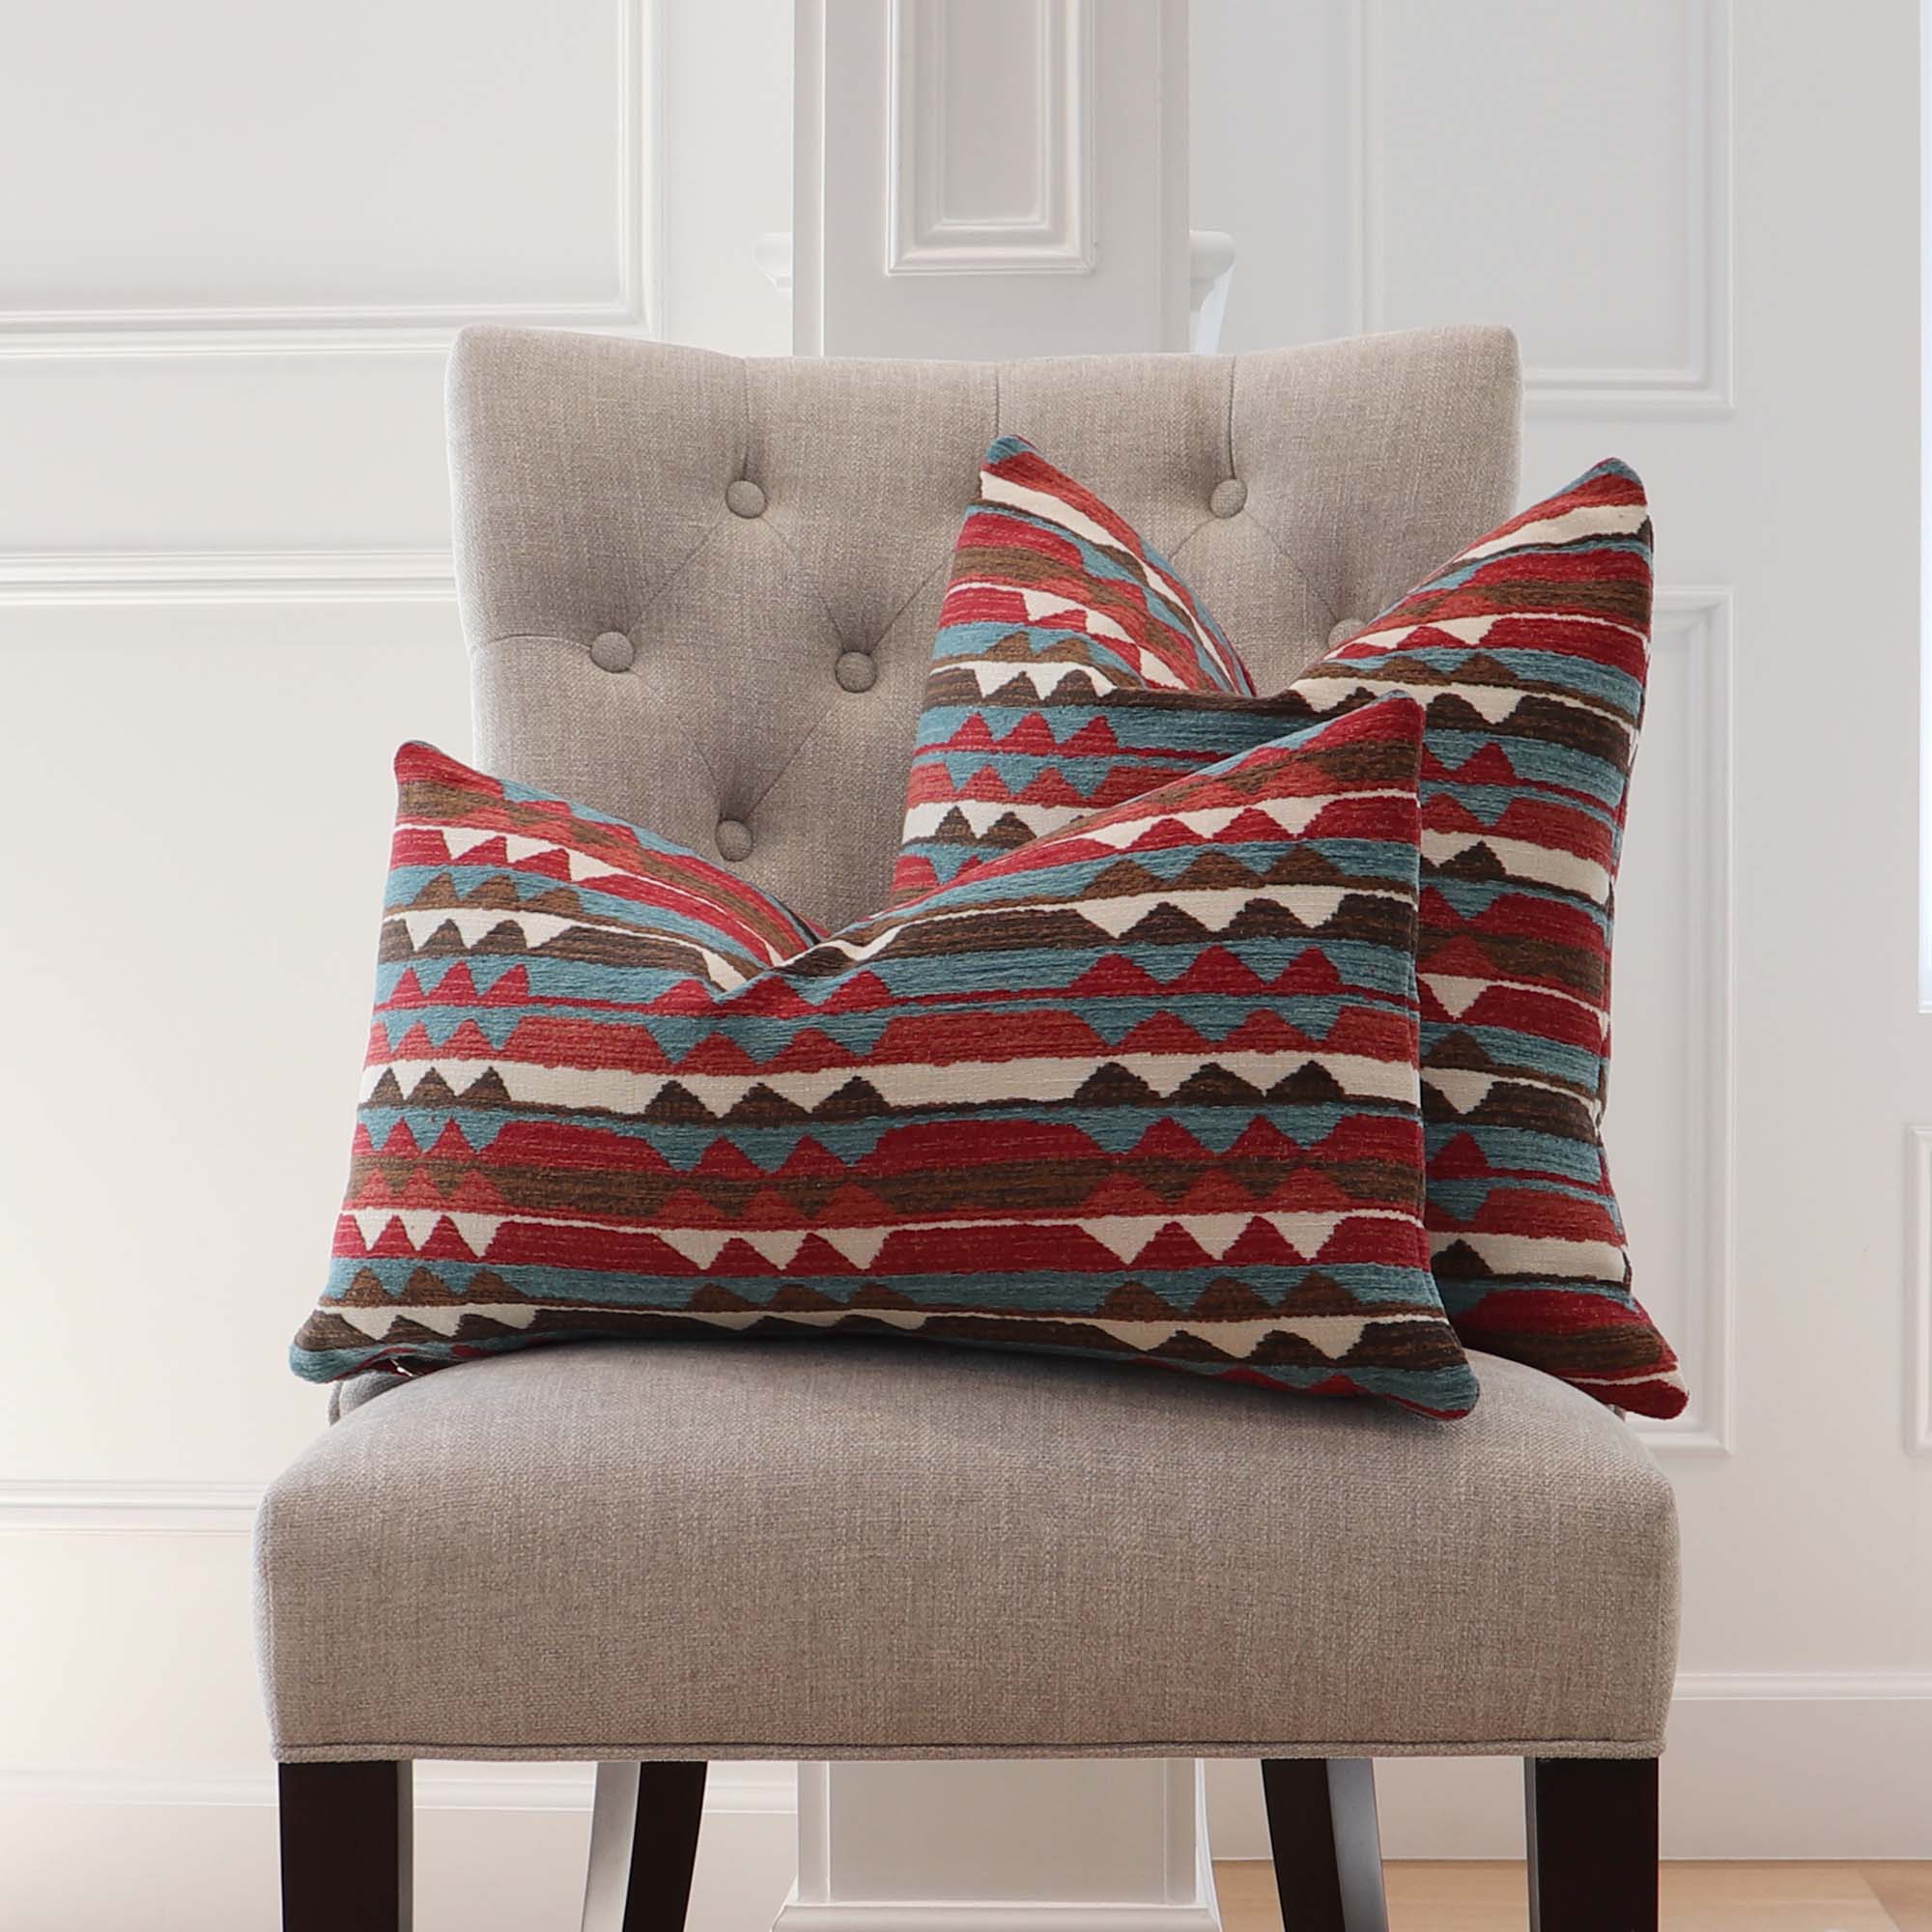 Extra-Large Woven Throw Pillow 24in x 24in